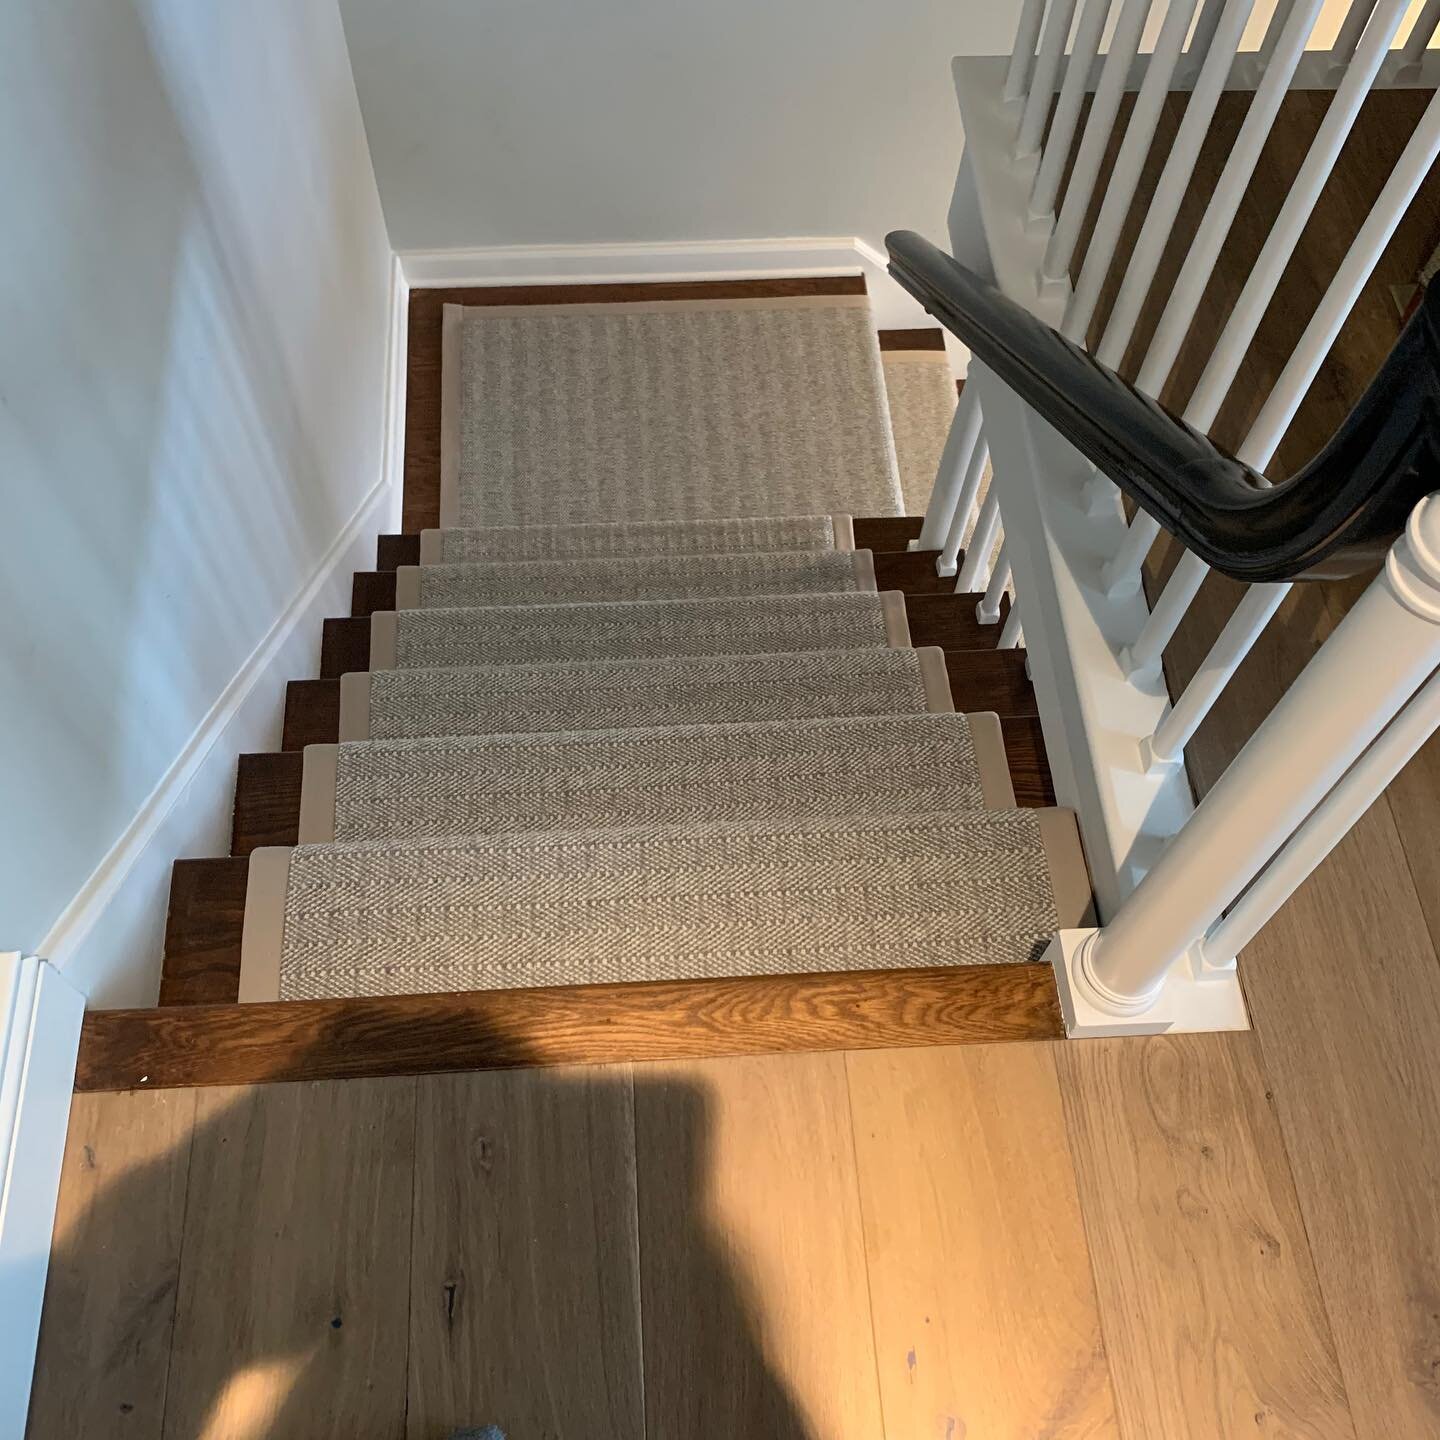 Wool stair runner.  Burlington Hill section.  Great job Ross and Shawn